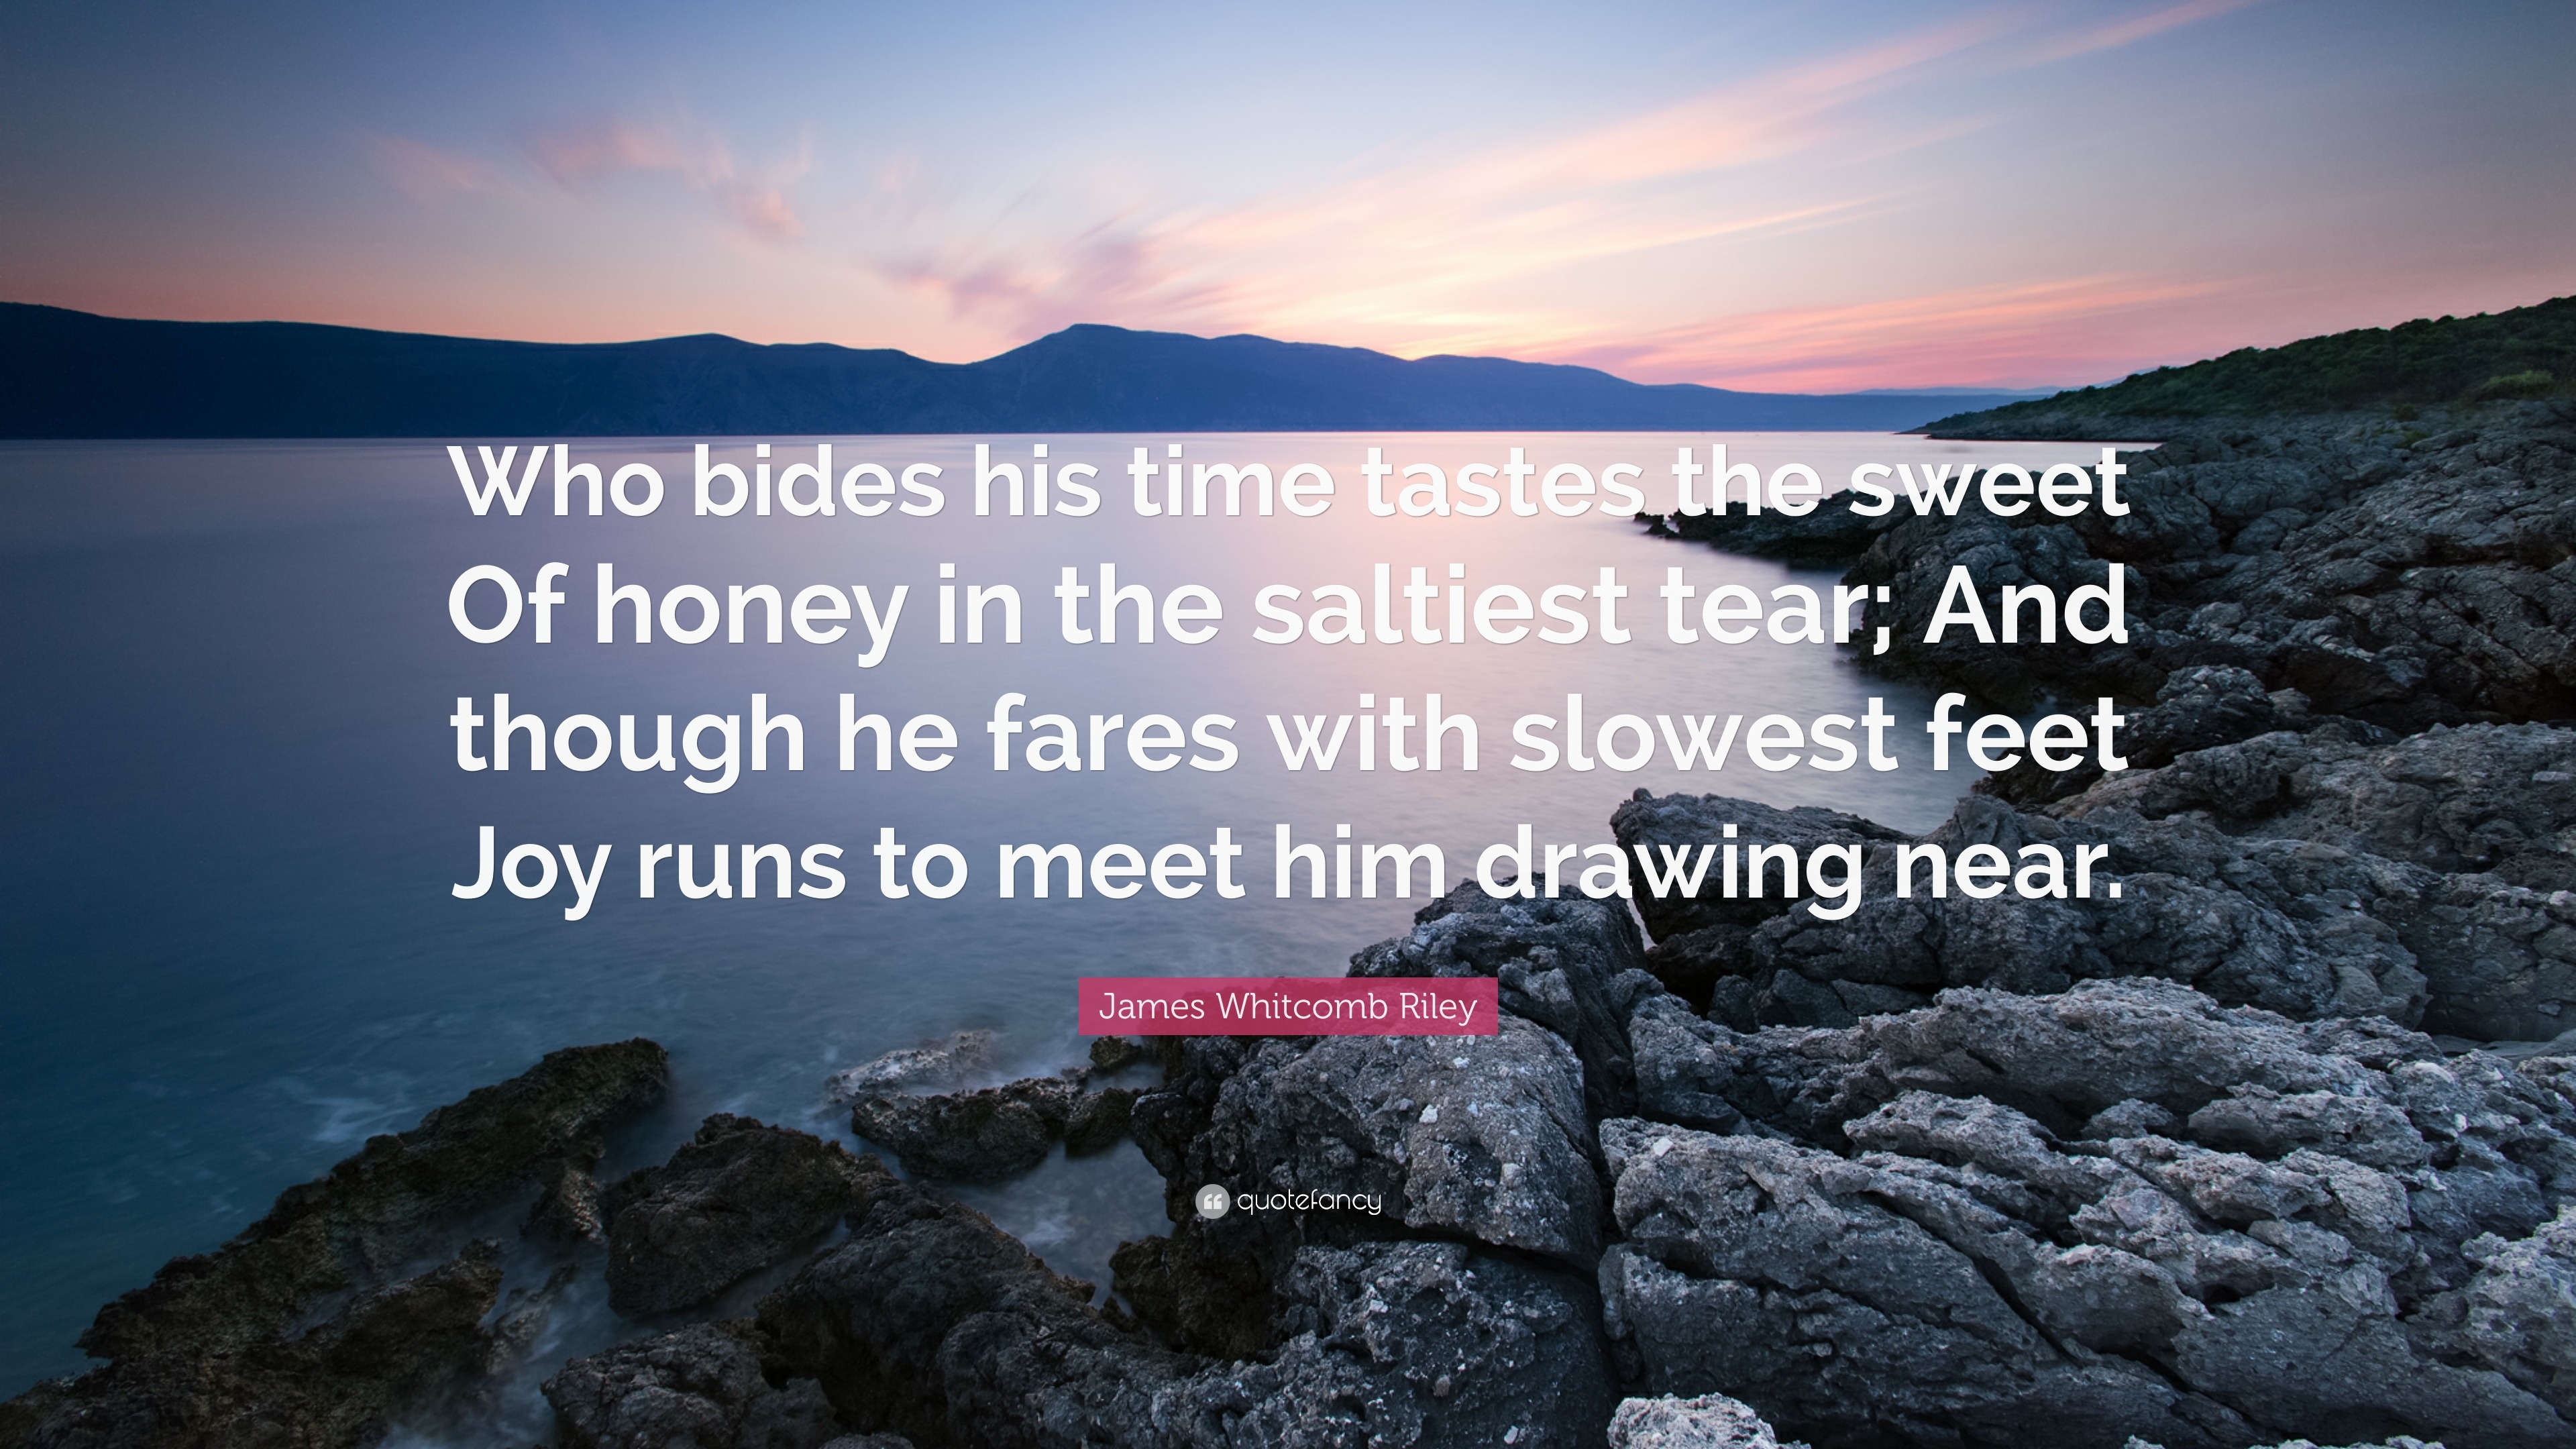 James Whitcomb Riley Quote: “Who bides his time tastes the sweet